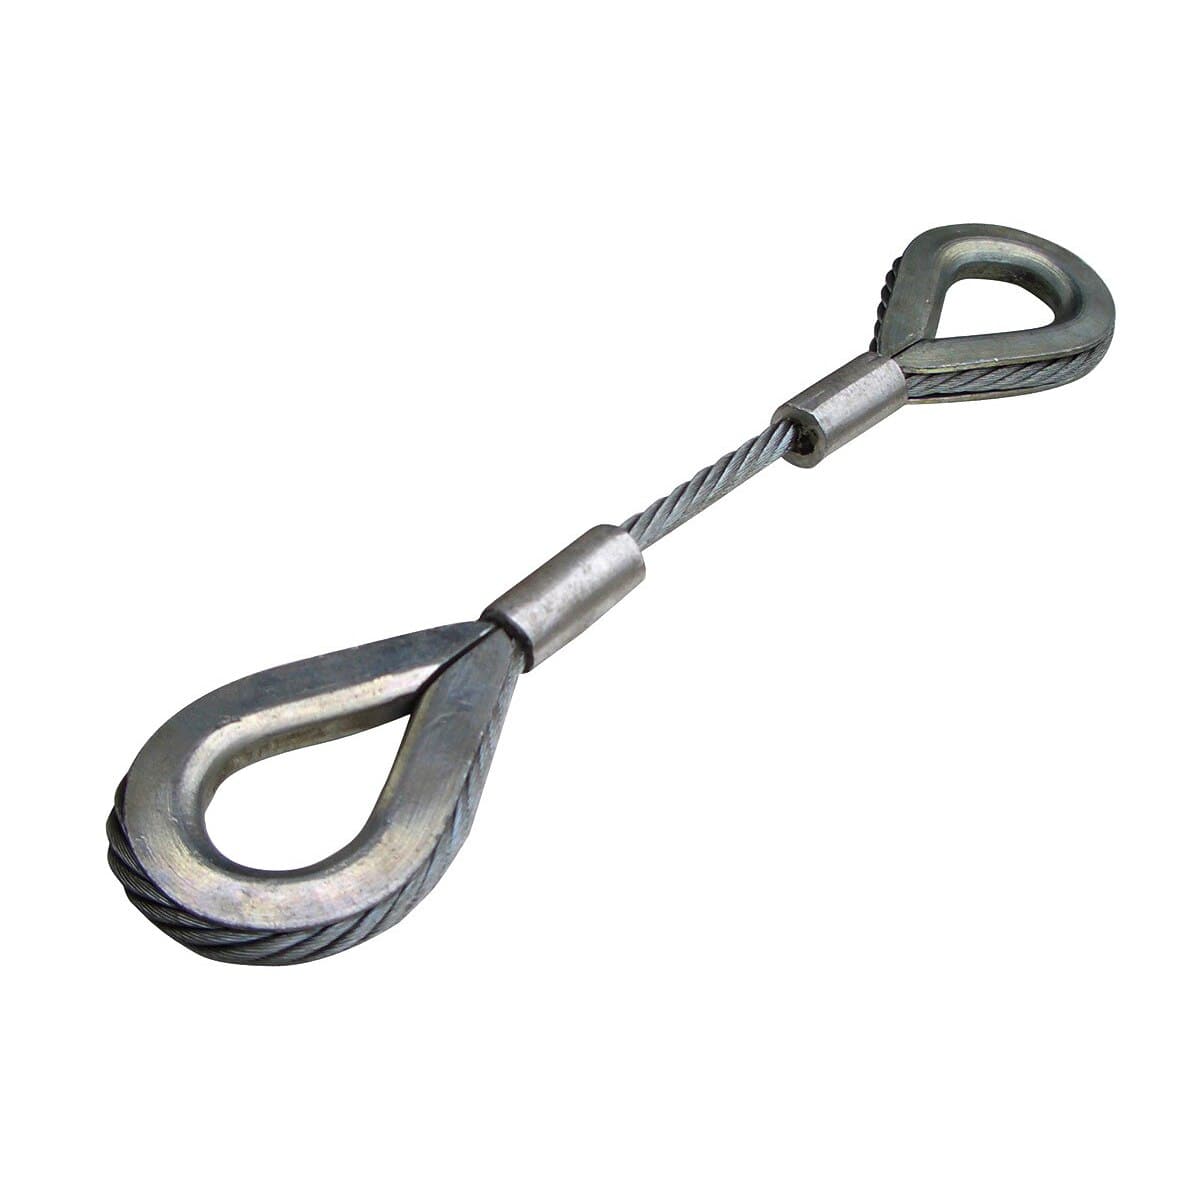 Weha Swivel Hook and Shackle, Lifting Accessories